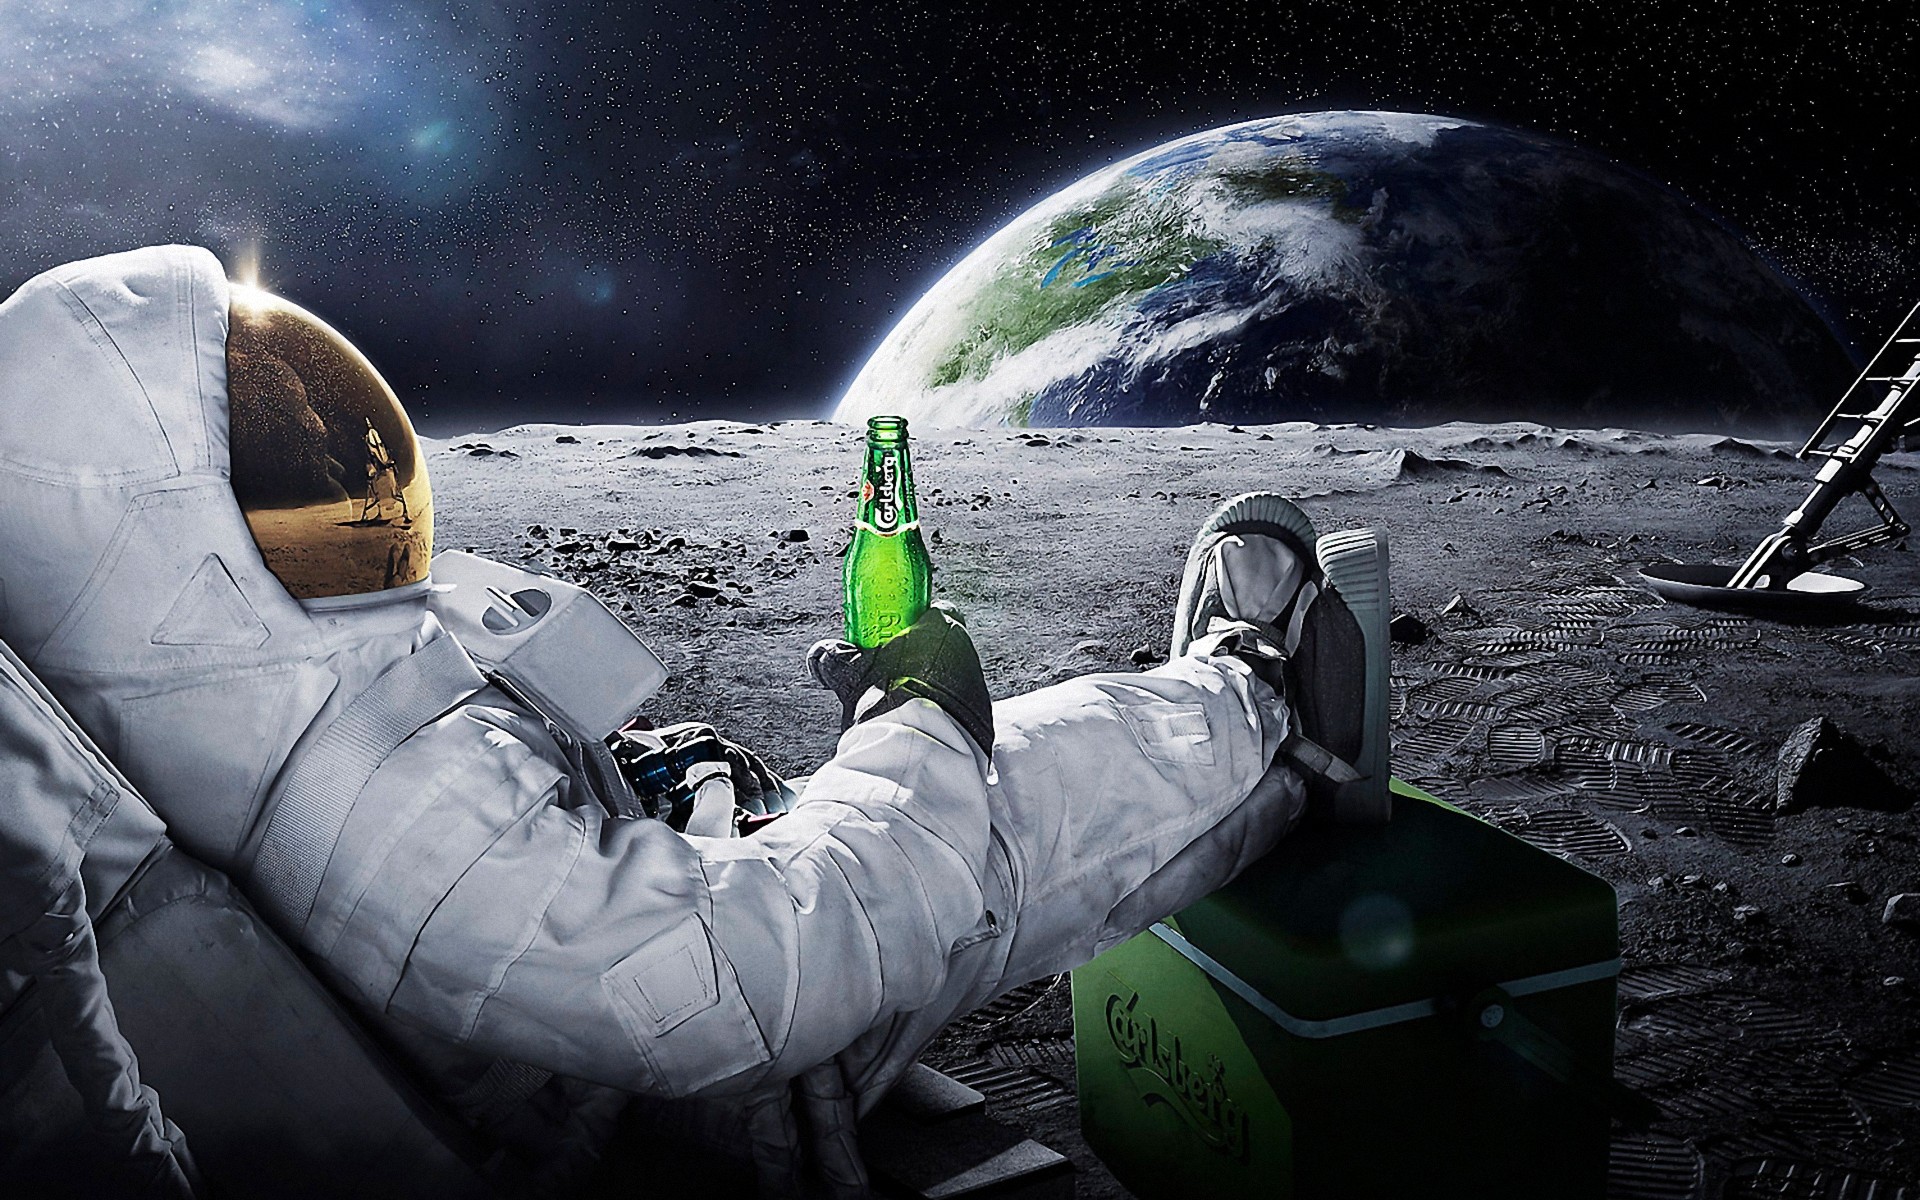 beers, Outer, Space, Earth, Astronauts, Relaxing, Carlsberg, Moon, Landing Wallpaper